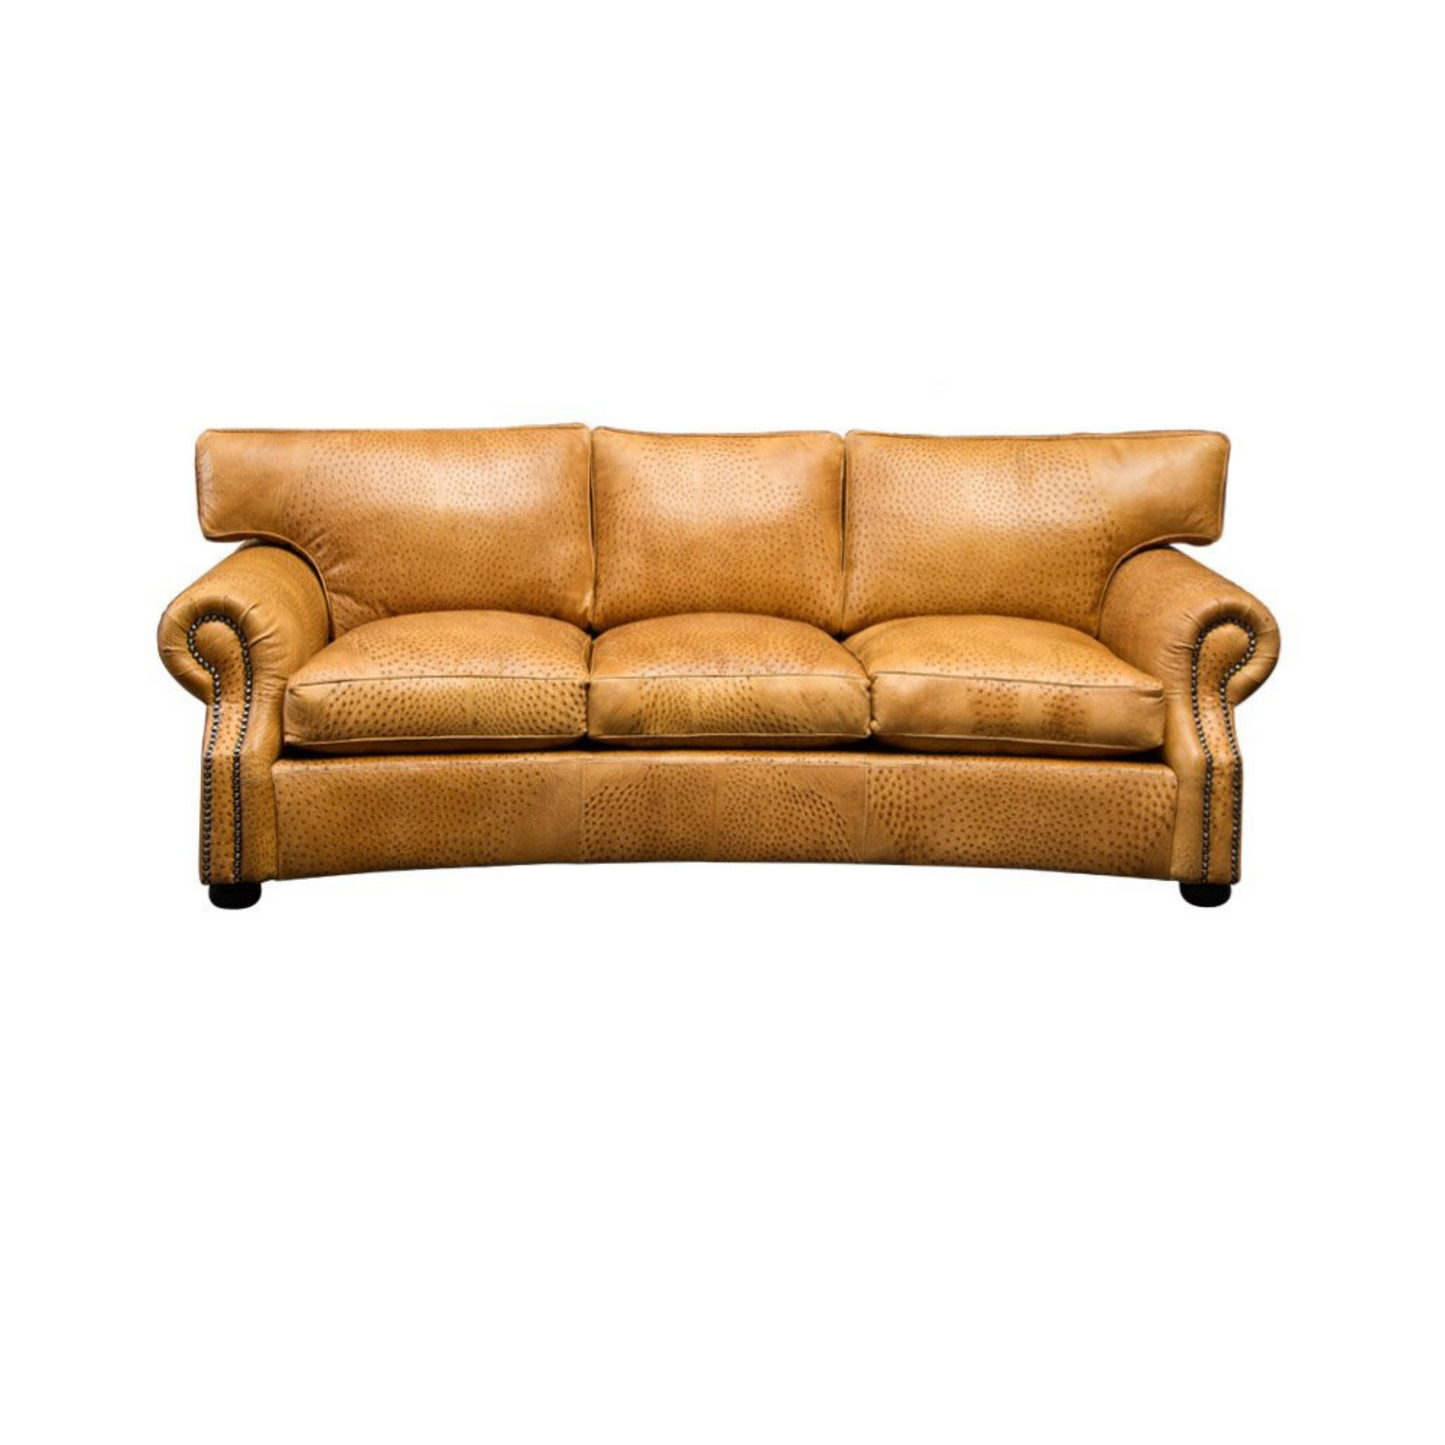 Tugela Ostrich Wingback – Indulge in luxury with our unique Tugela Ostrich Leather Wingback sofa. Elevate your home or office with this luxurious, one-of-a-kind piece.  For a customized touch, contact us for a color chart, allowing you to select the perfect hue for a truly distinctive addition to your space.